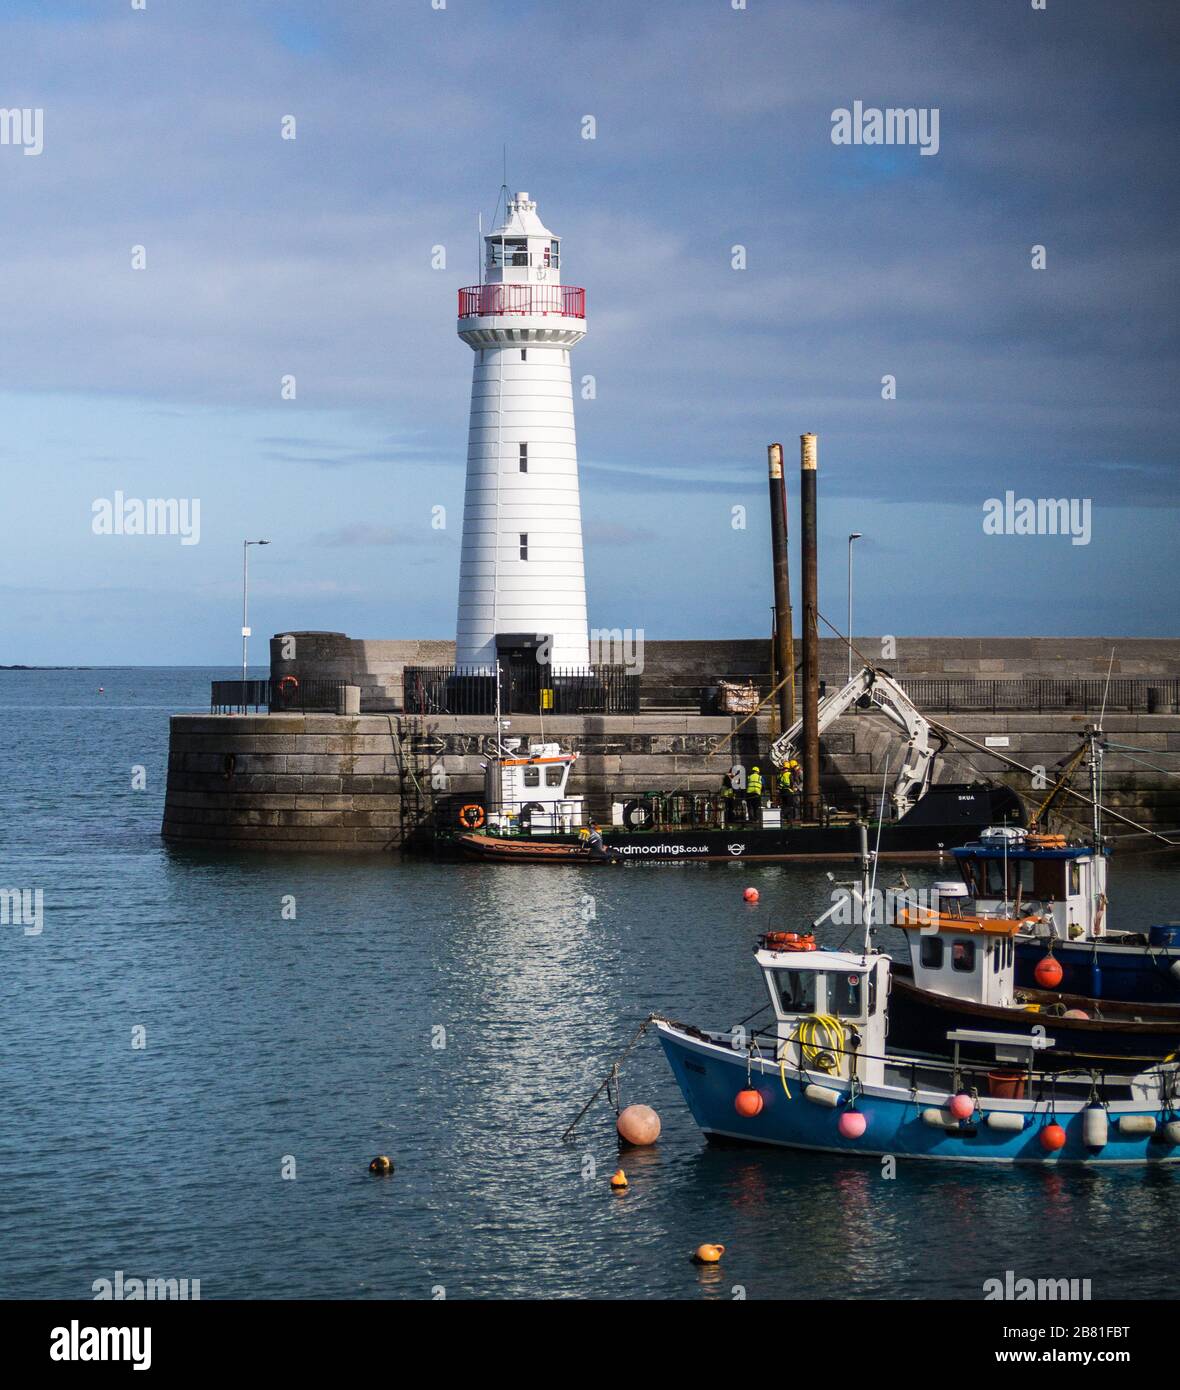 The Lighthouse at Donaghadee Harbour, County Down, Northern Ireland, UK Stock Photo